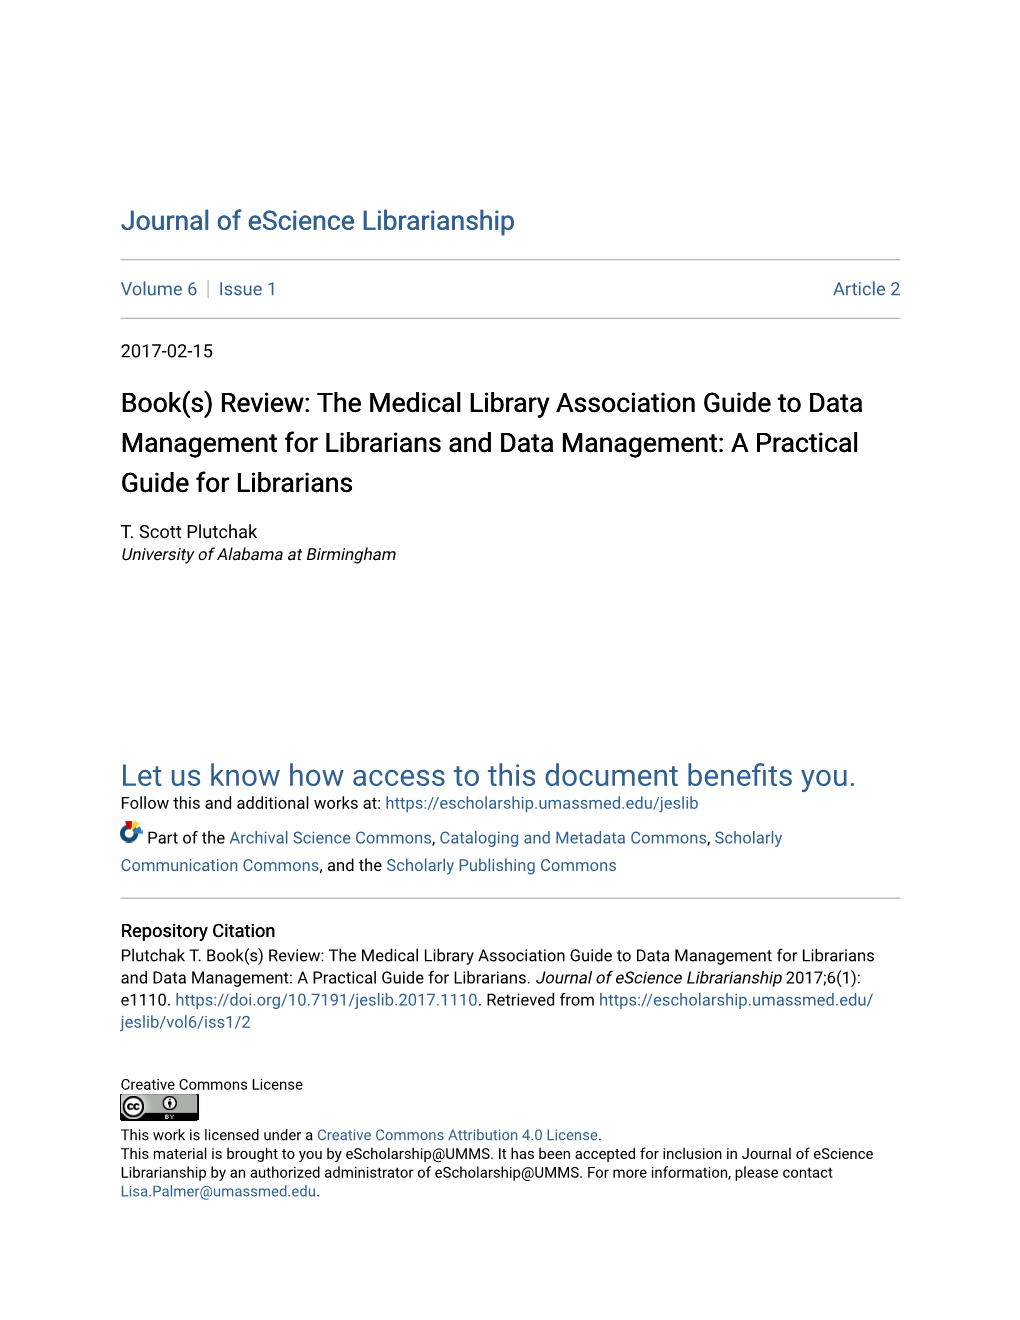 The Medical Library Association Guide to Data Management for Librarians and Data Management: a Practical Guide for Librarians